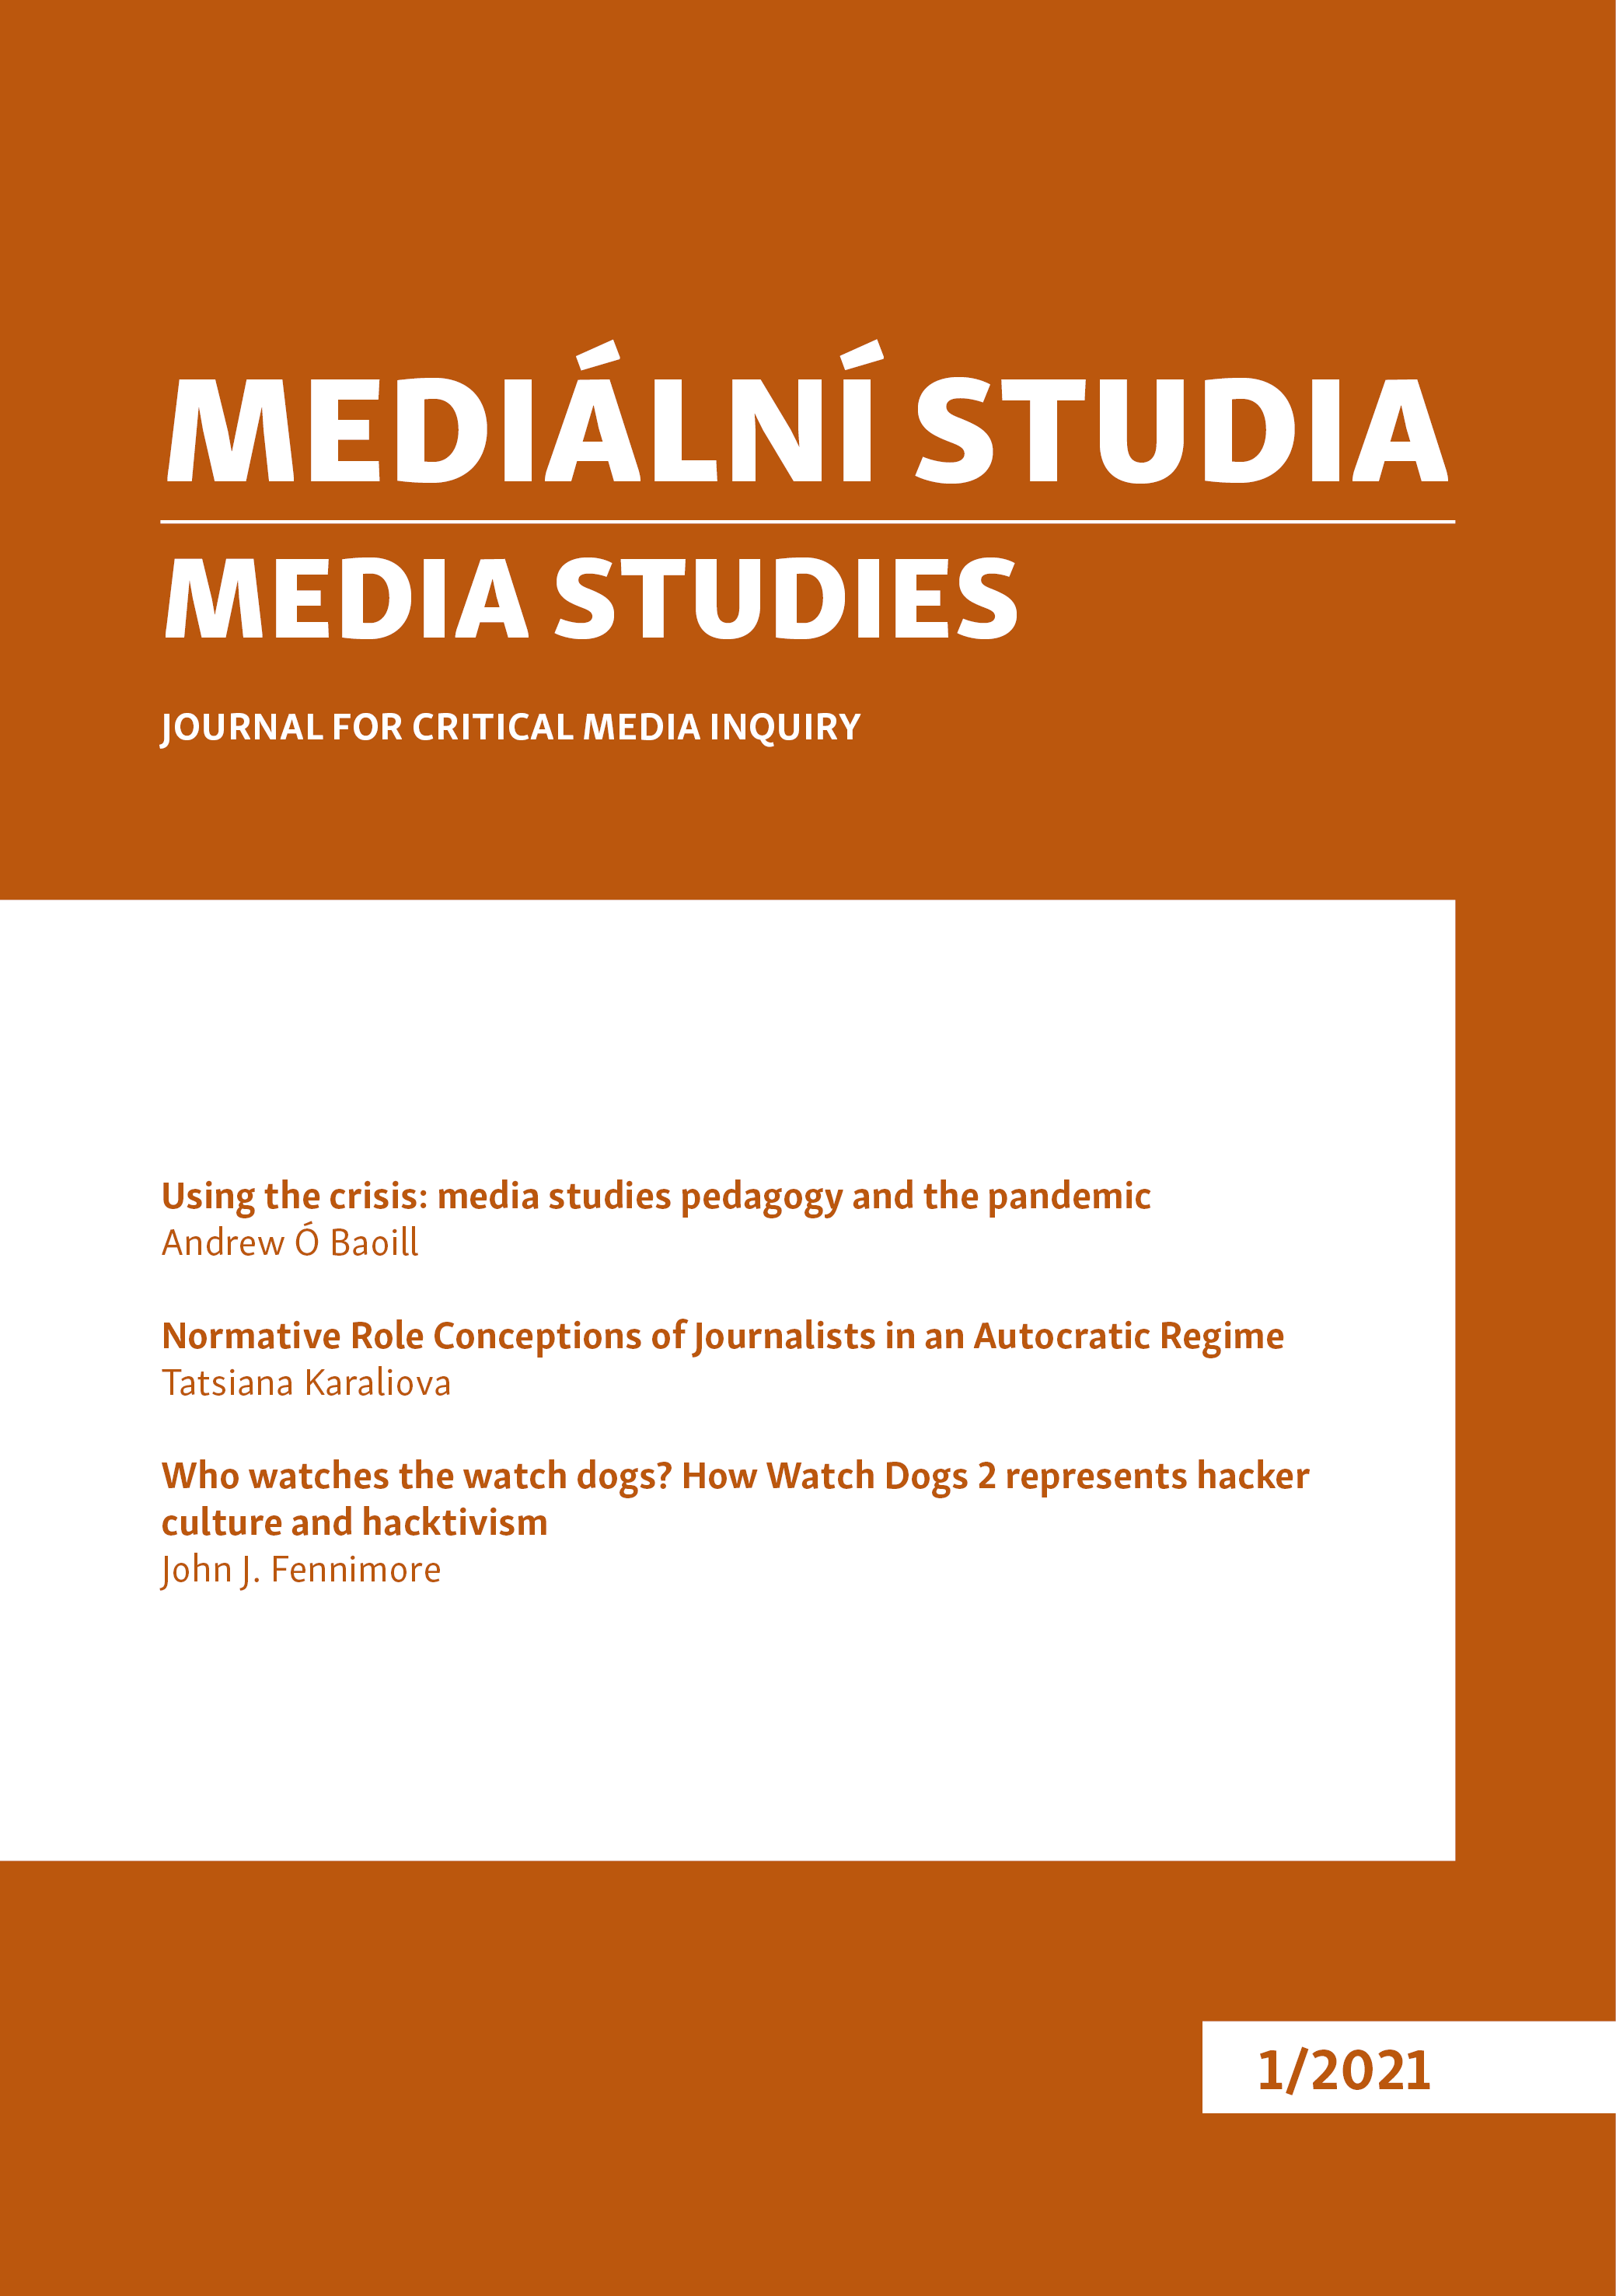 Using the crisis: media studies pedagogy and the pandemic